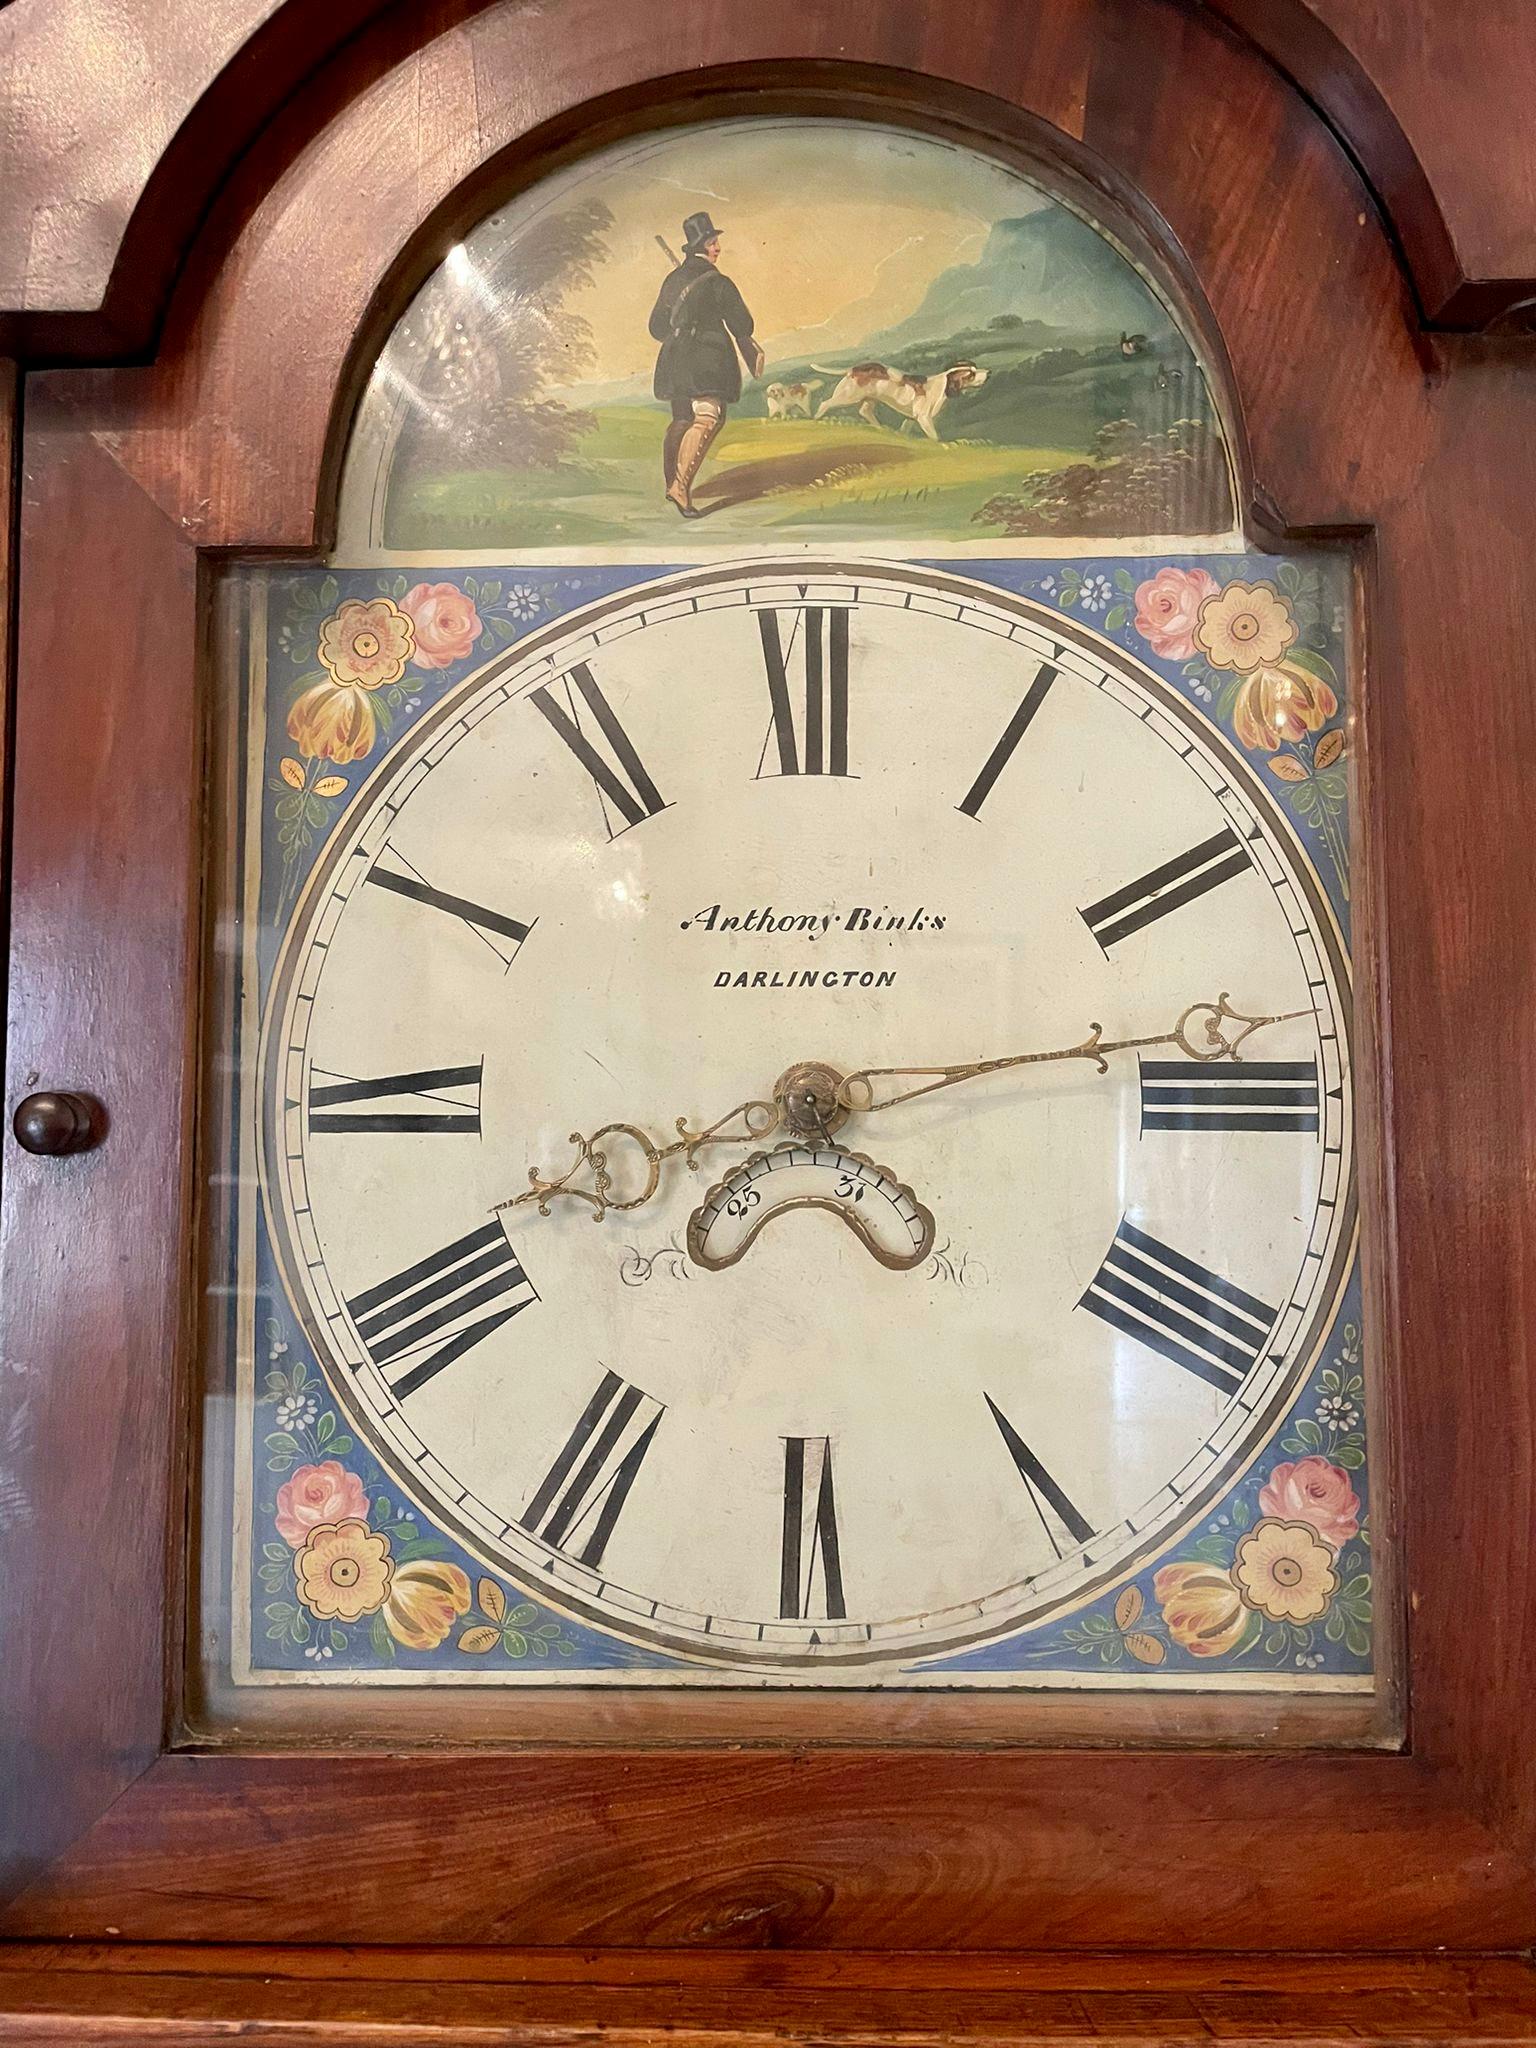 Antique Victorian oak & mahogany painted arched dial grandfather clock signed Anthony Binks having a carved shaped mahogany swan neck pediment with two turned mahogany columns and an arched shaped opening glass and mahogany door, short oak and